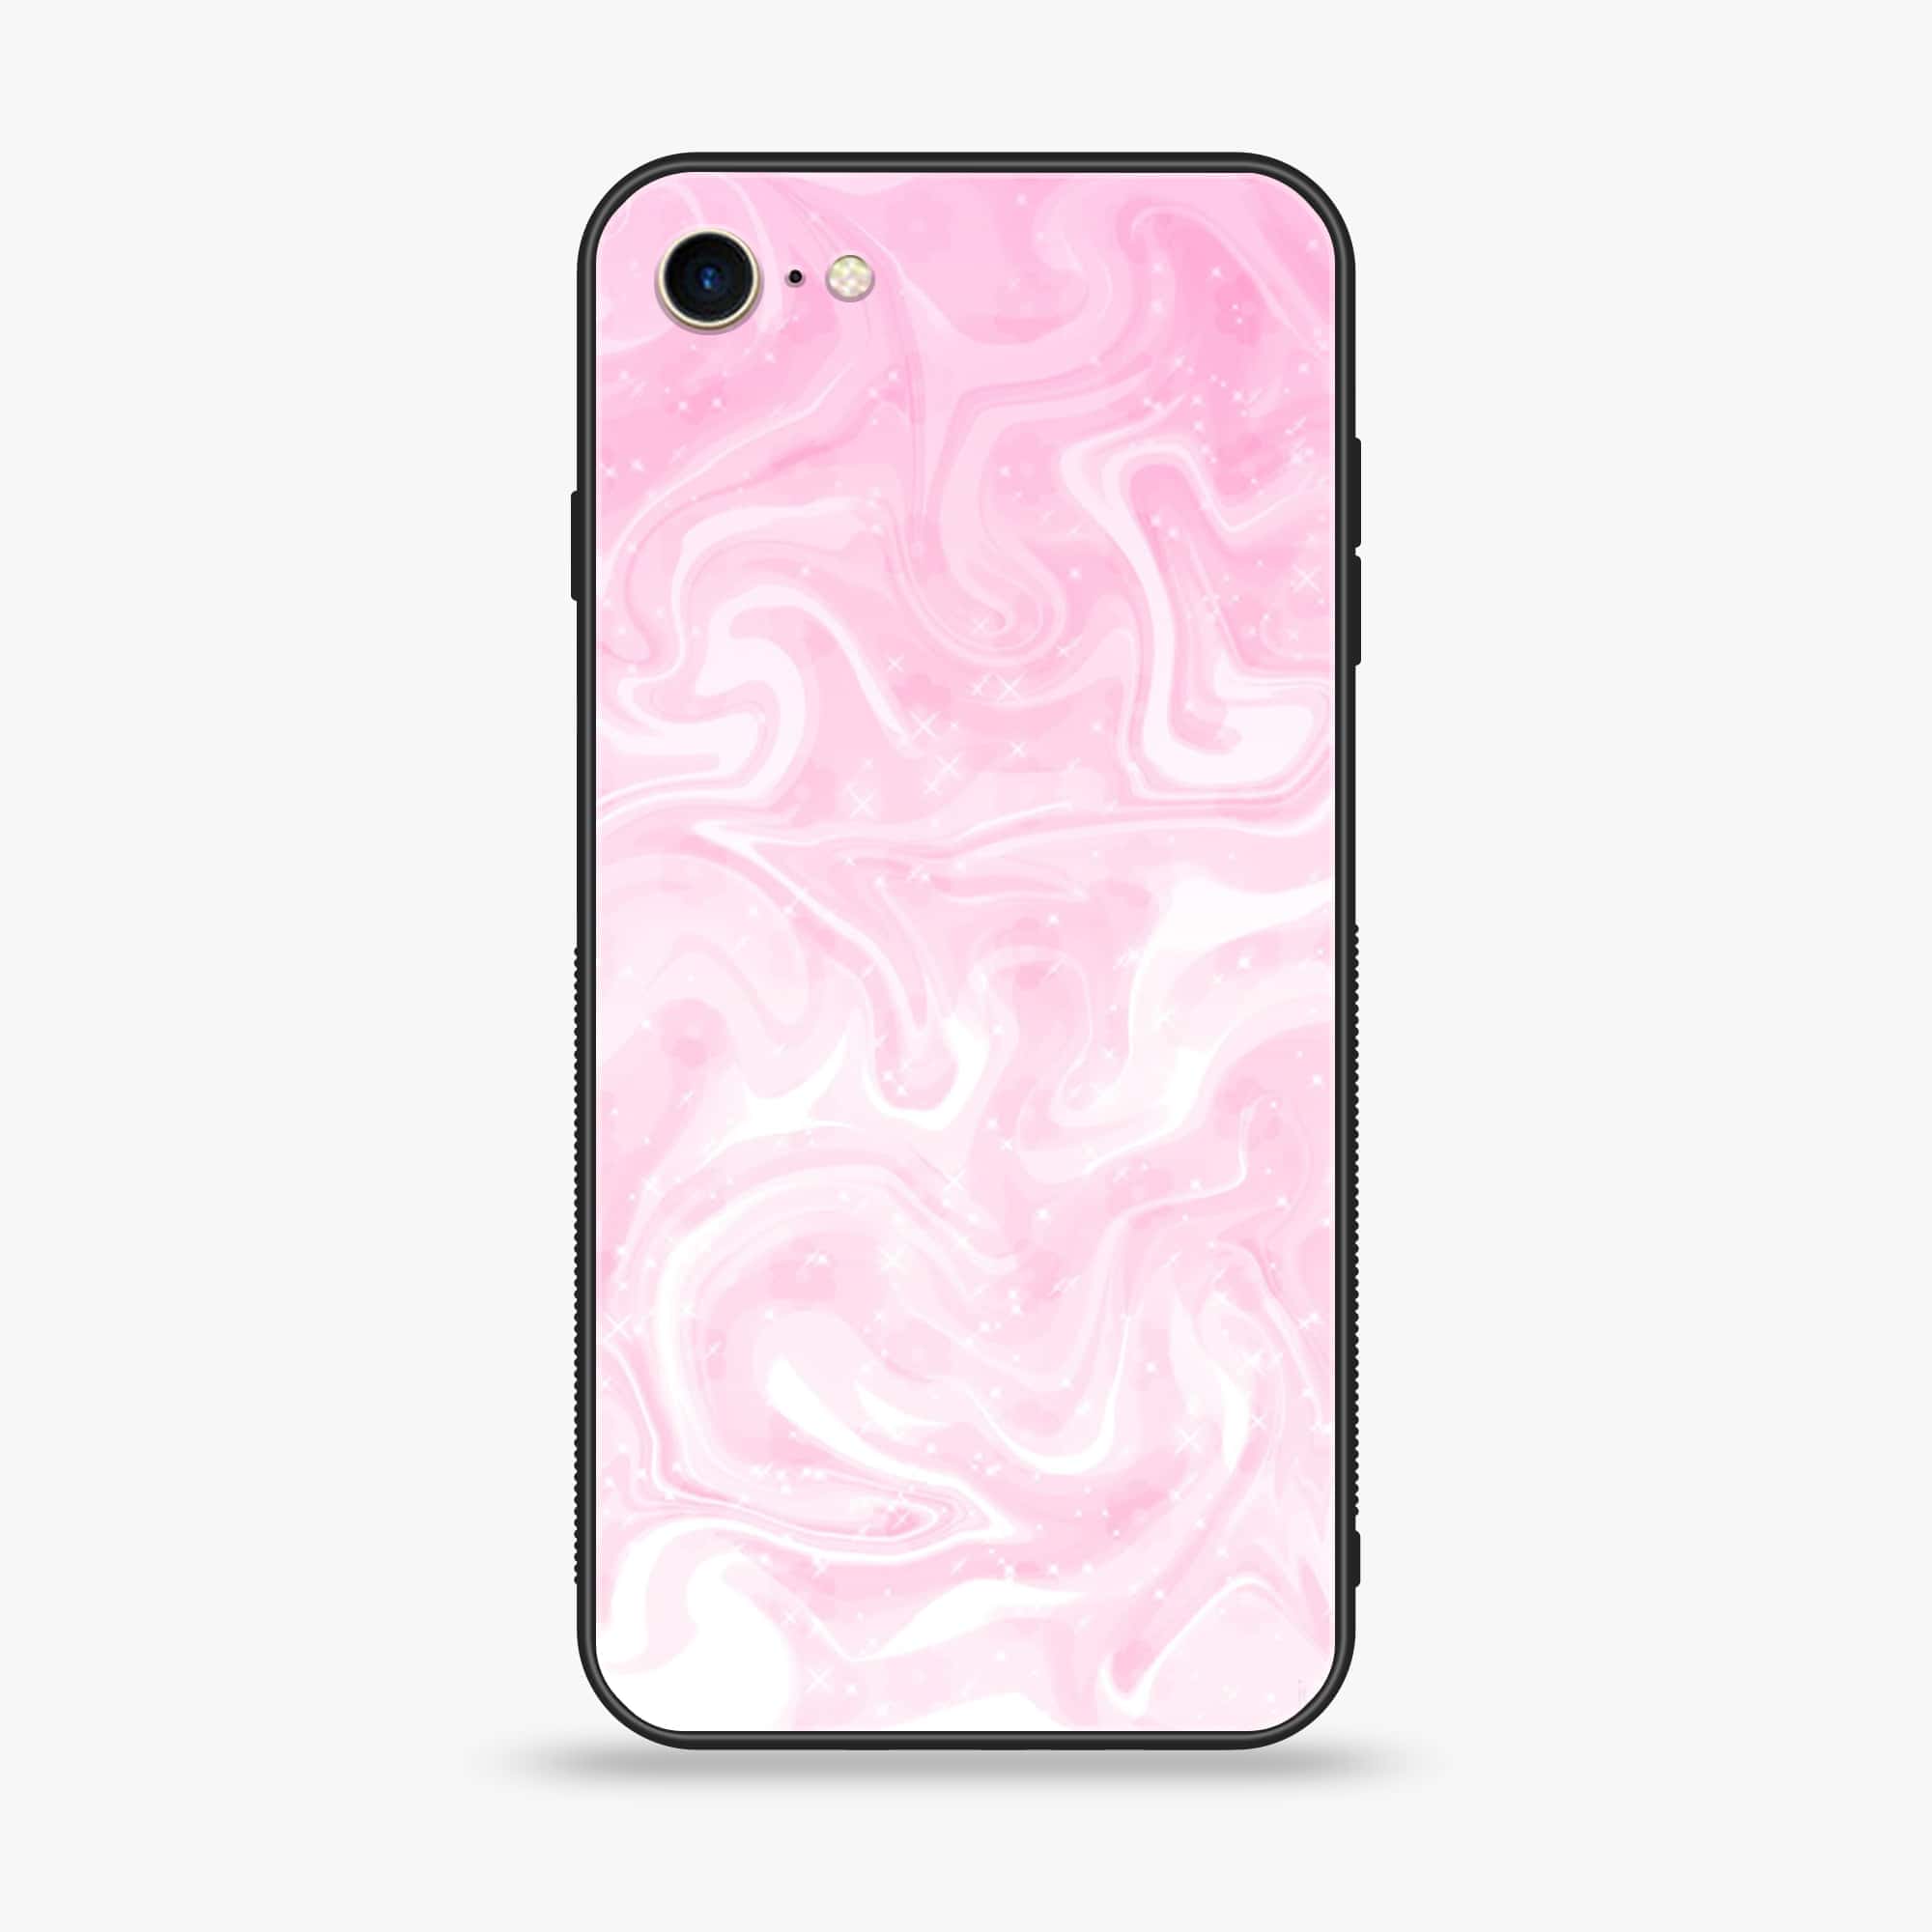 iPhone 6Plus  - Pink Marble Series - Premium Printed Glass soft Bumper shock Proof Case